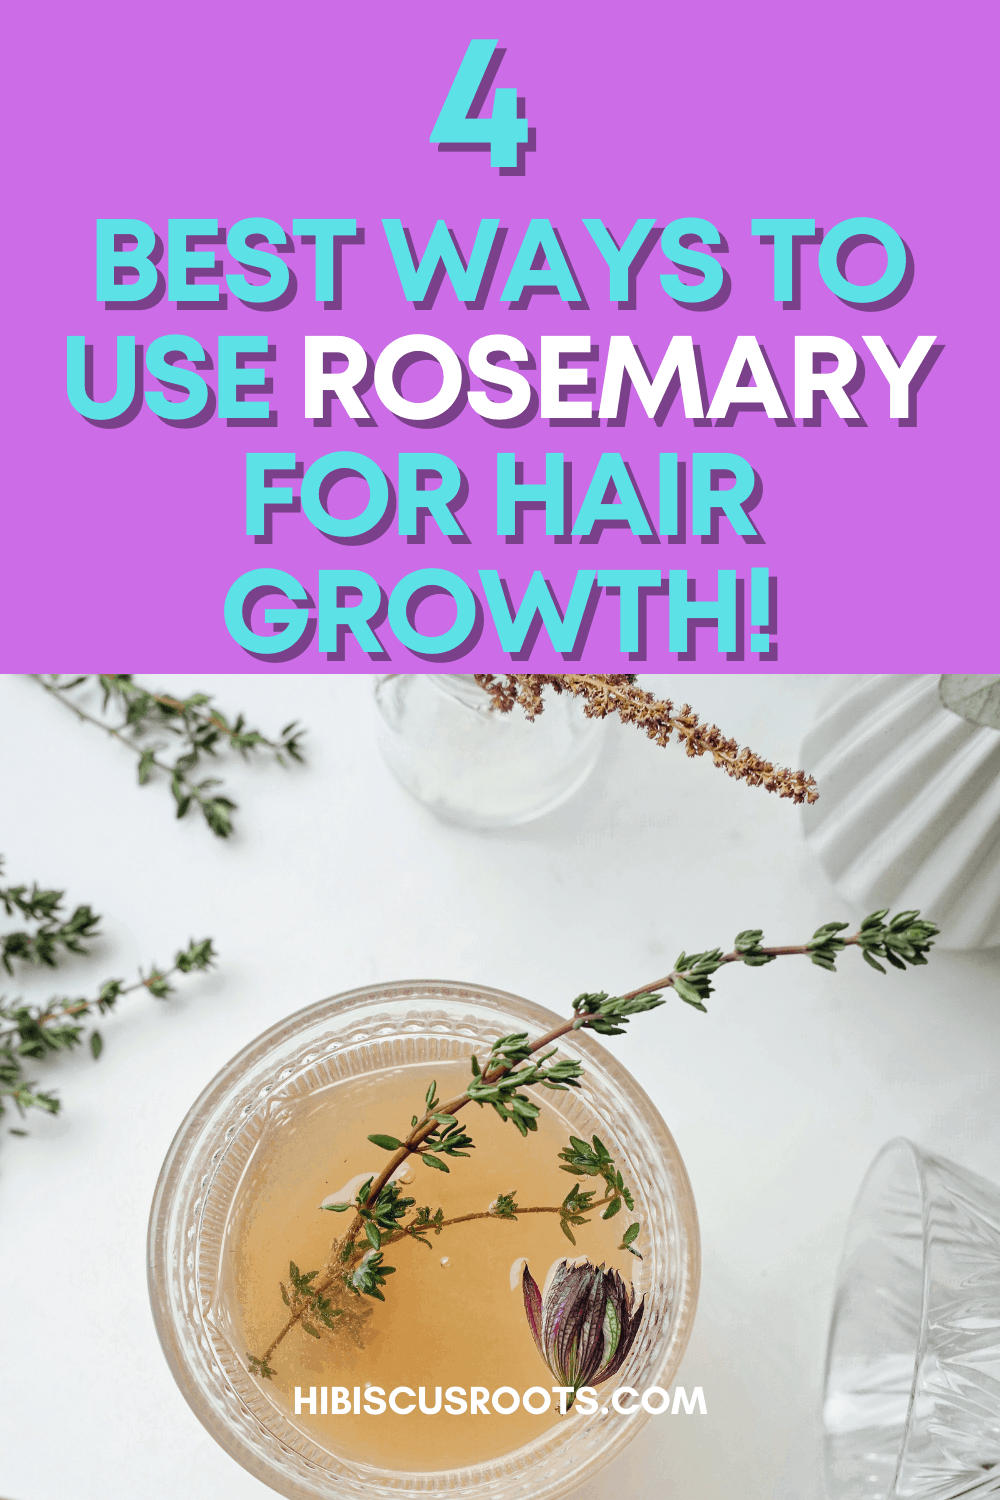 Why Rosemary is the BEST Herb for Natural Hair Growth!